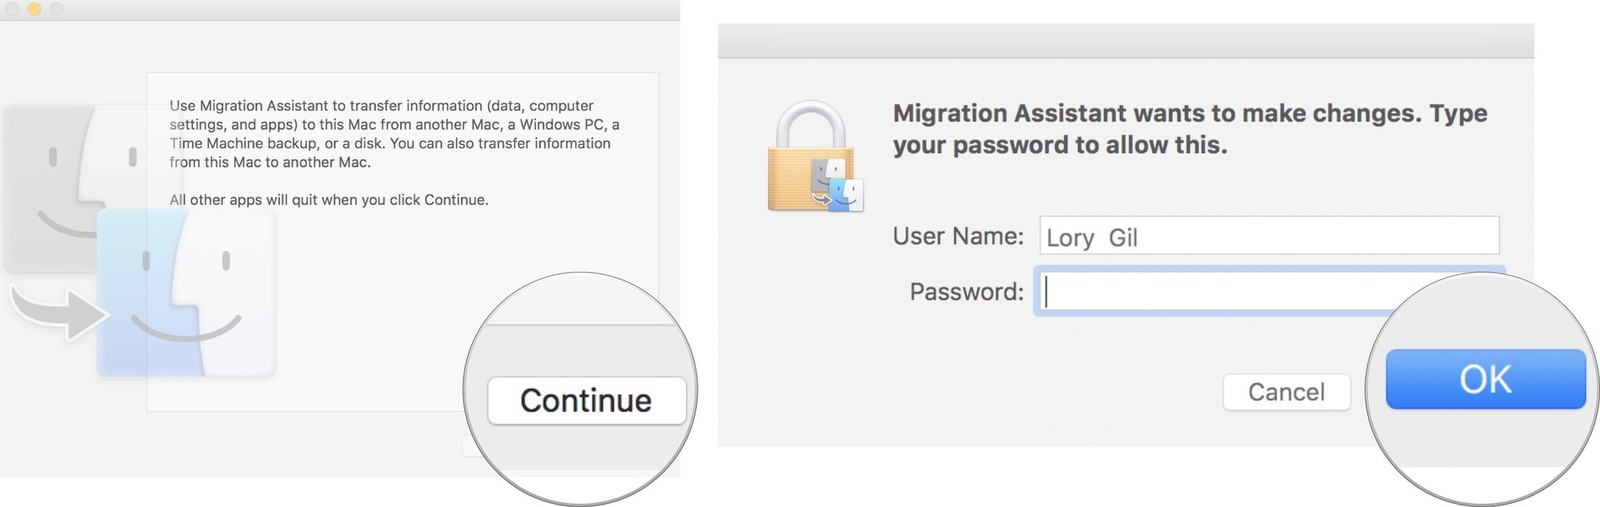 migration assistant app for windows from mac